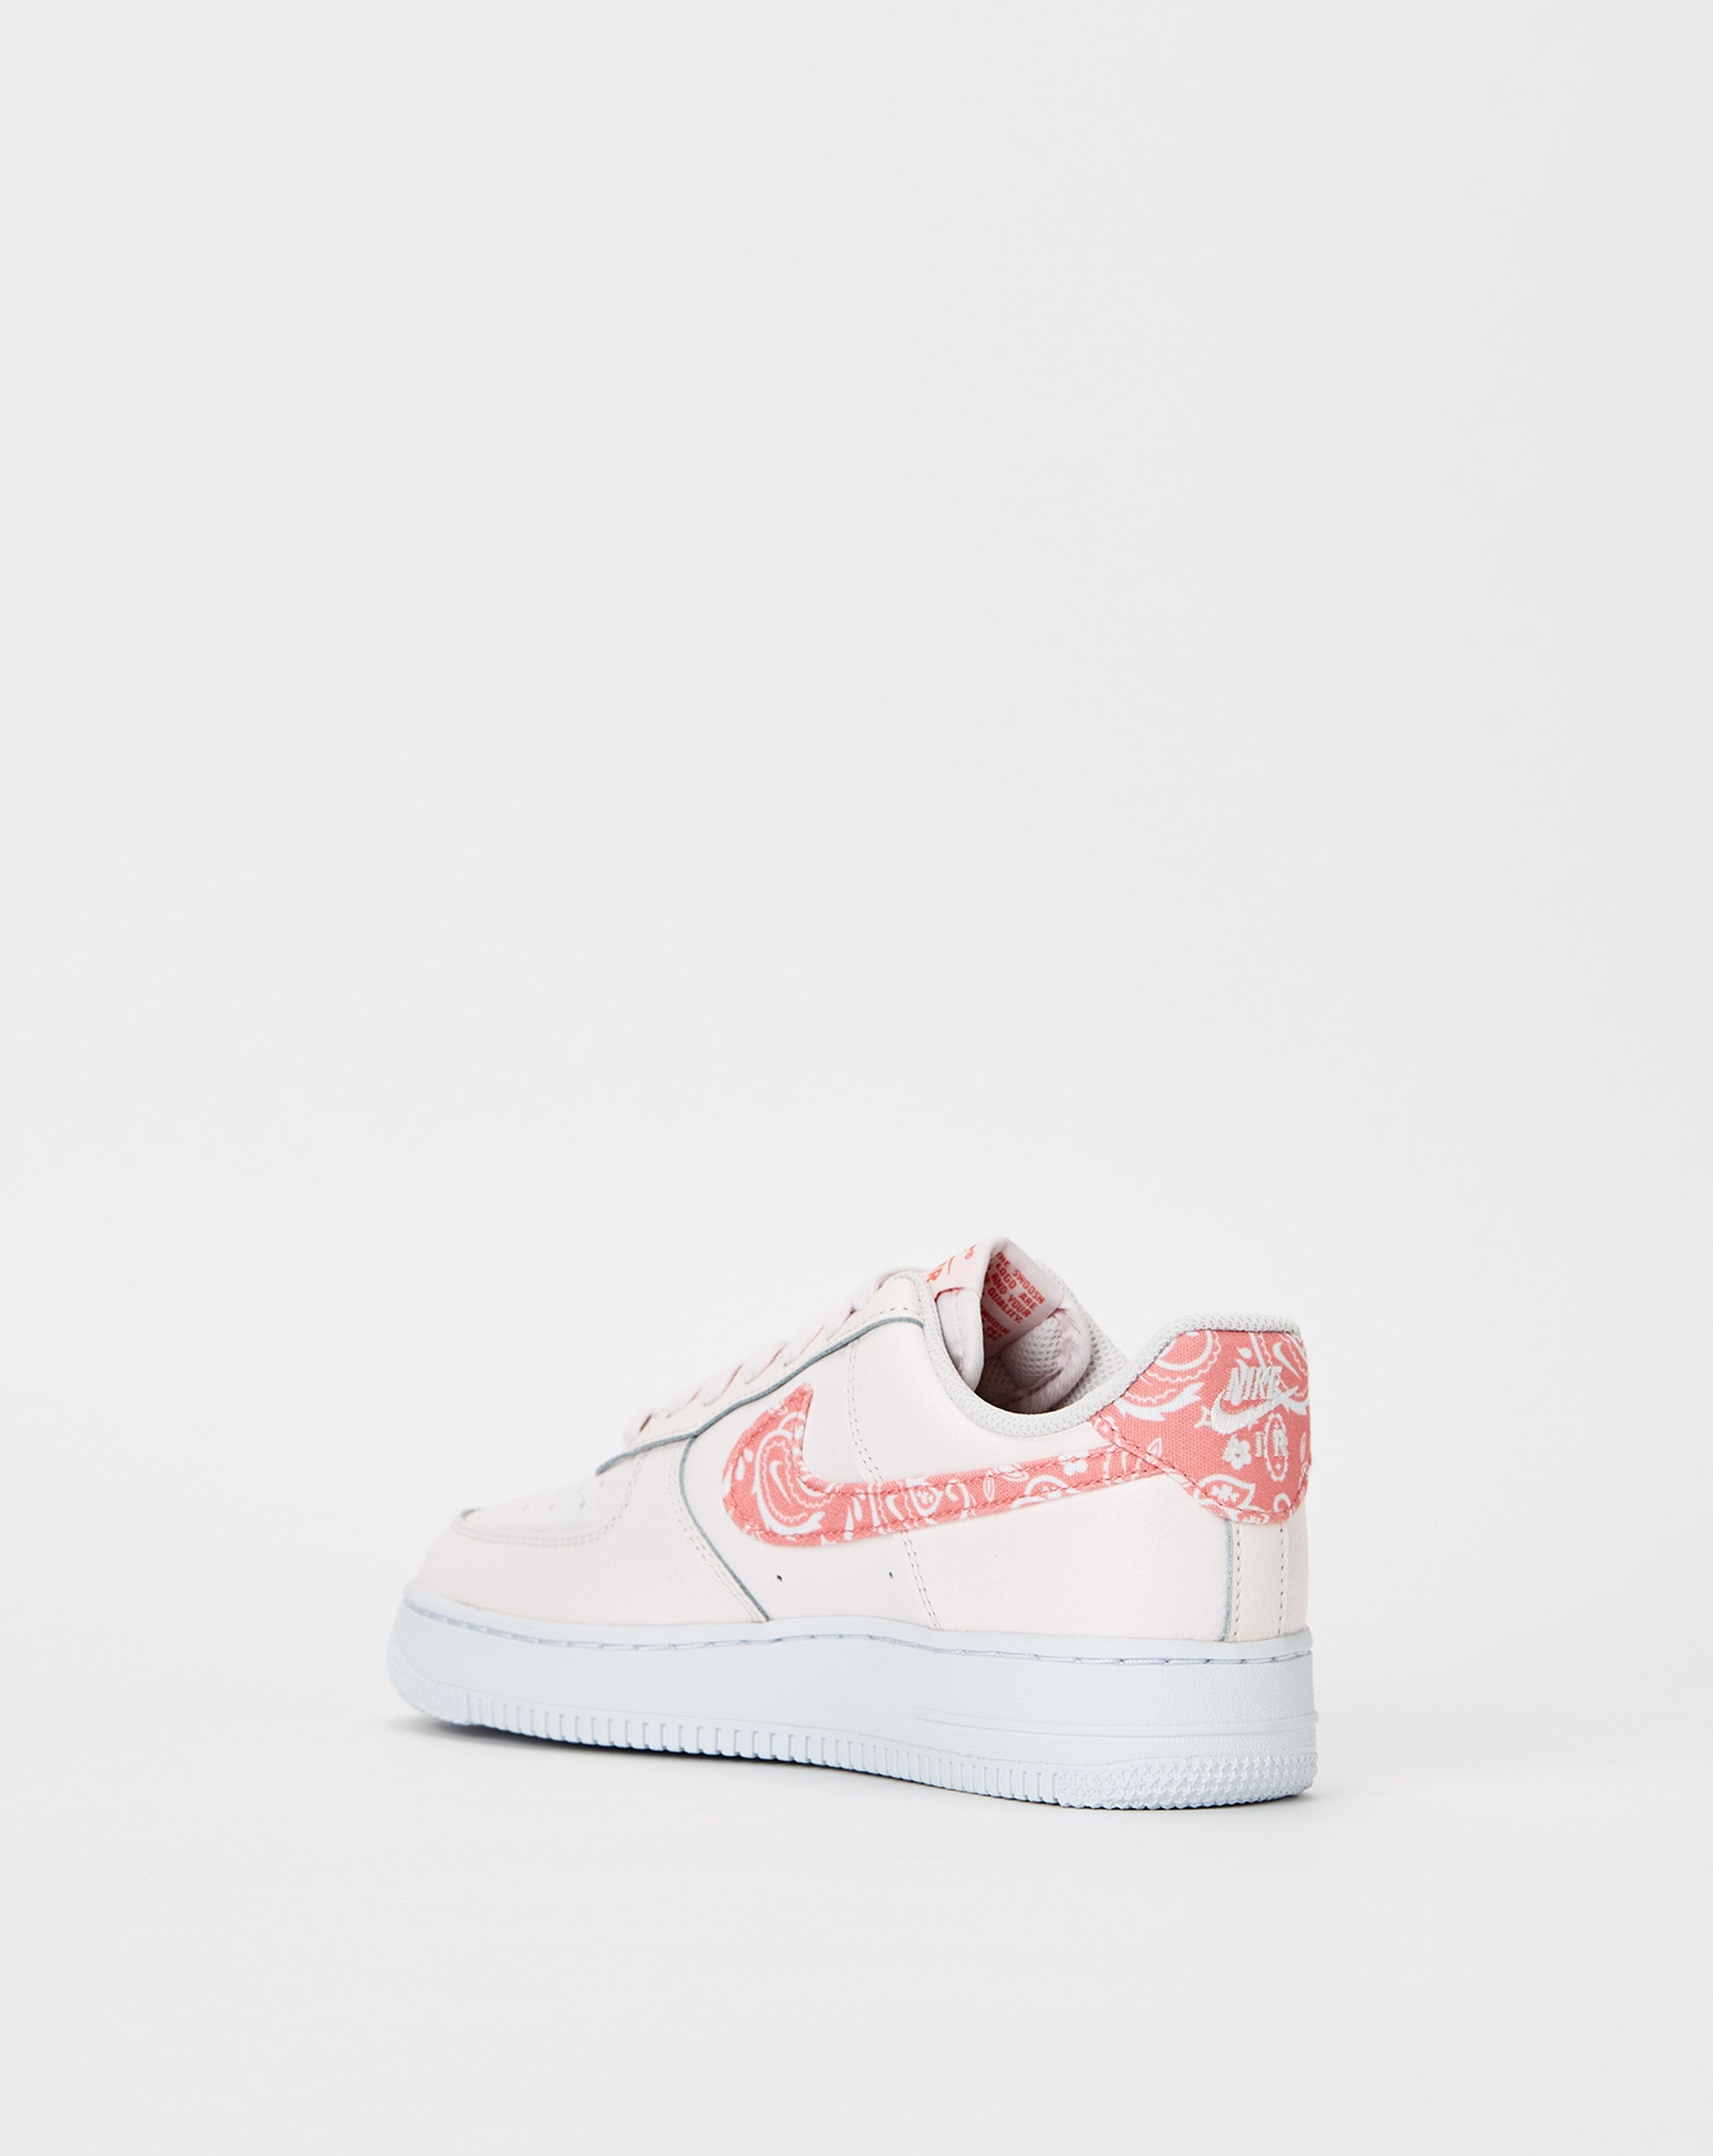 nike stevige air force 1 low white hydrogen blue